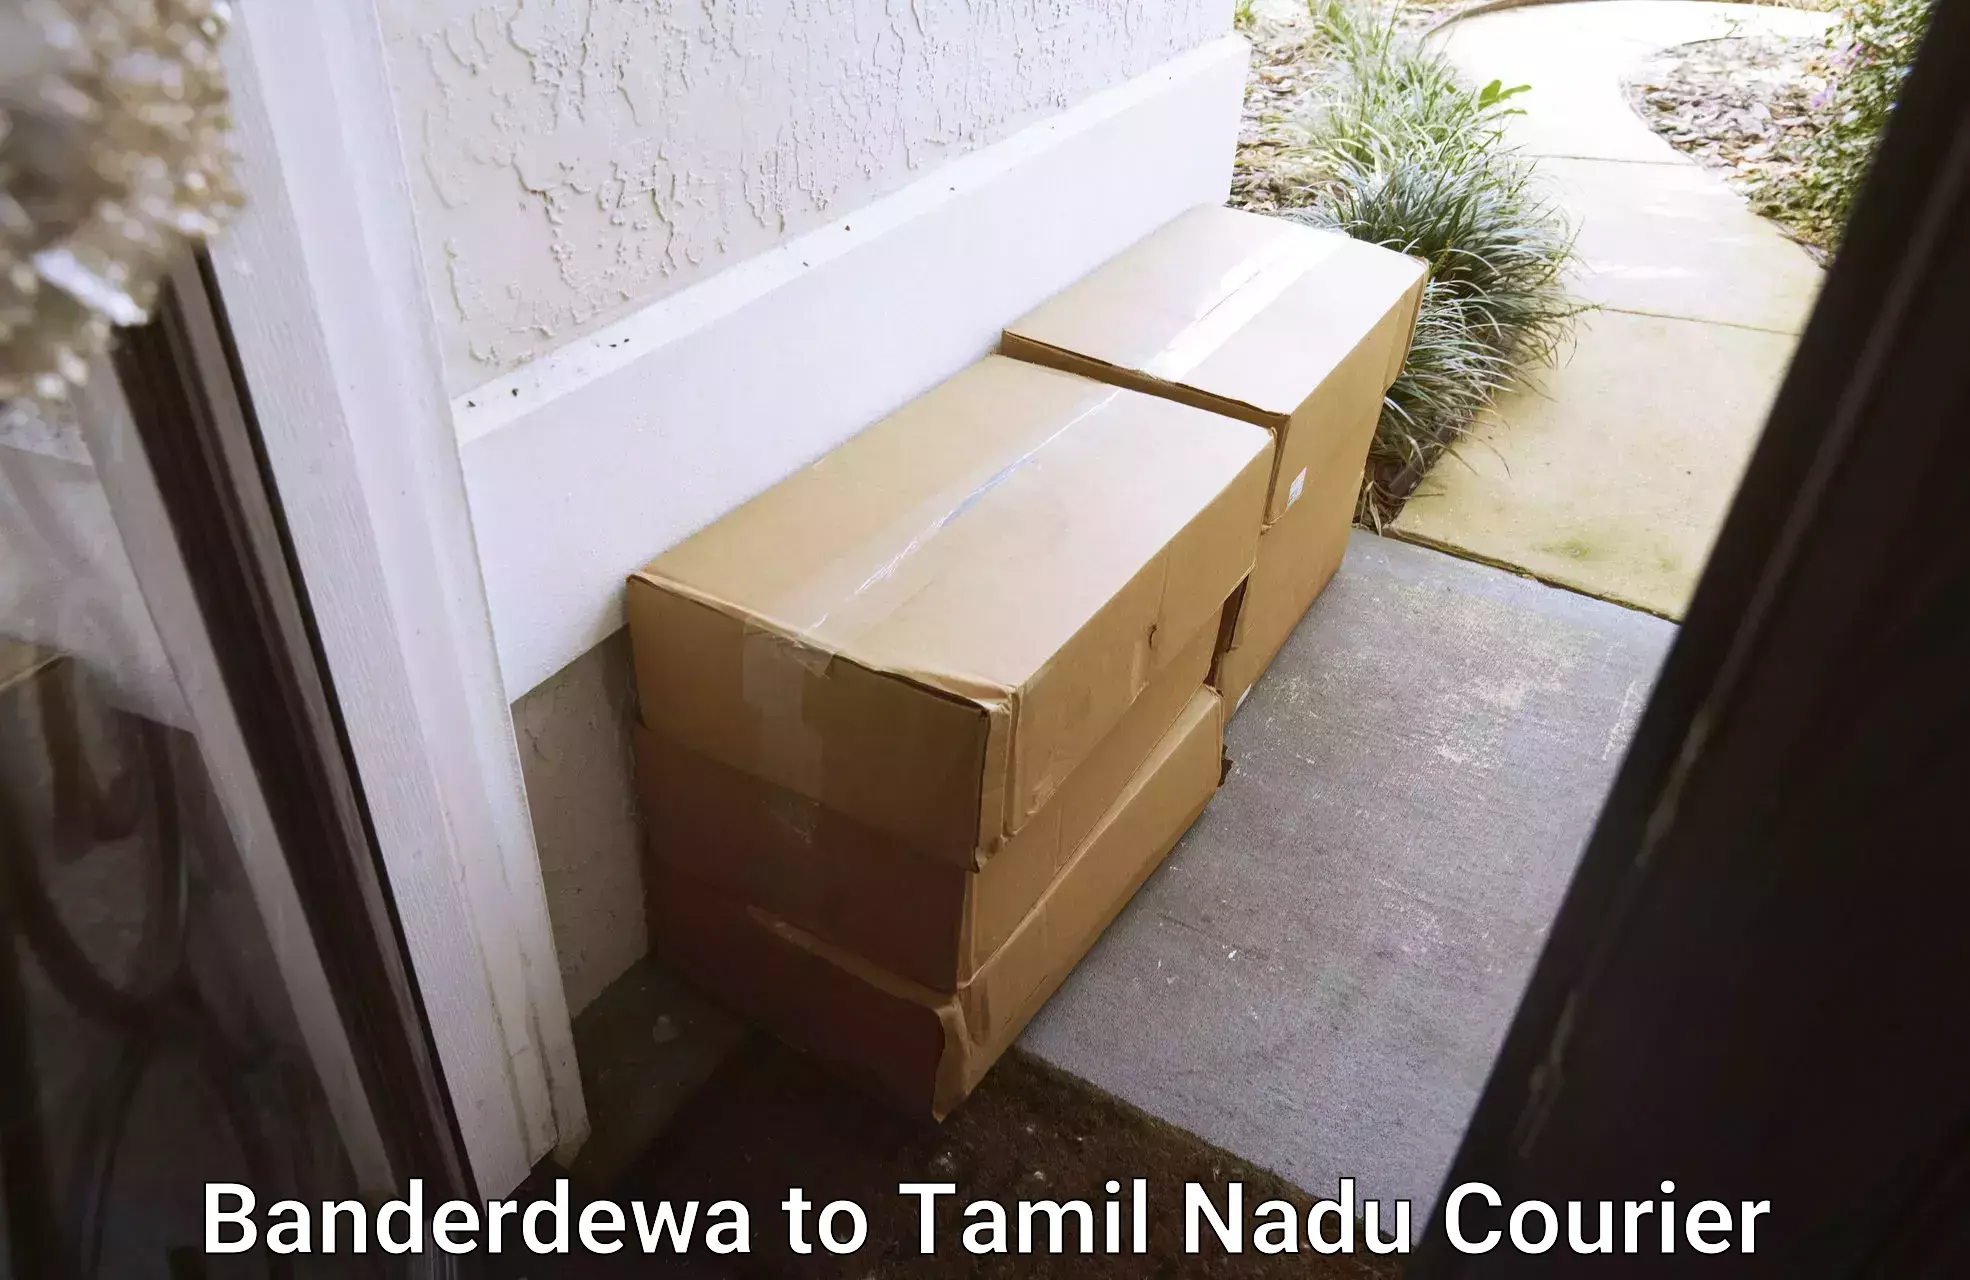 Full-service courier options in Banderdewa to Padi